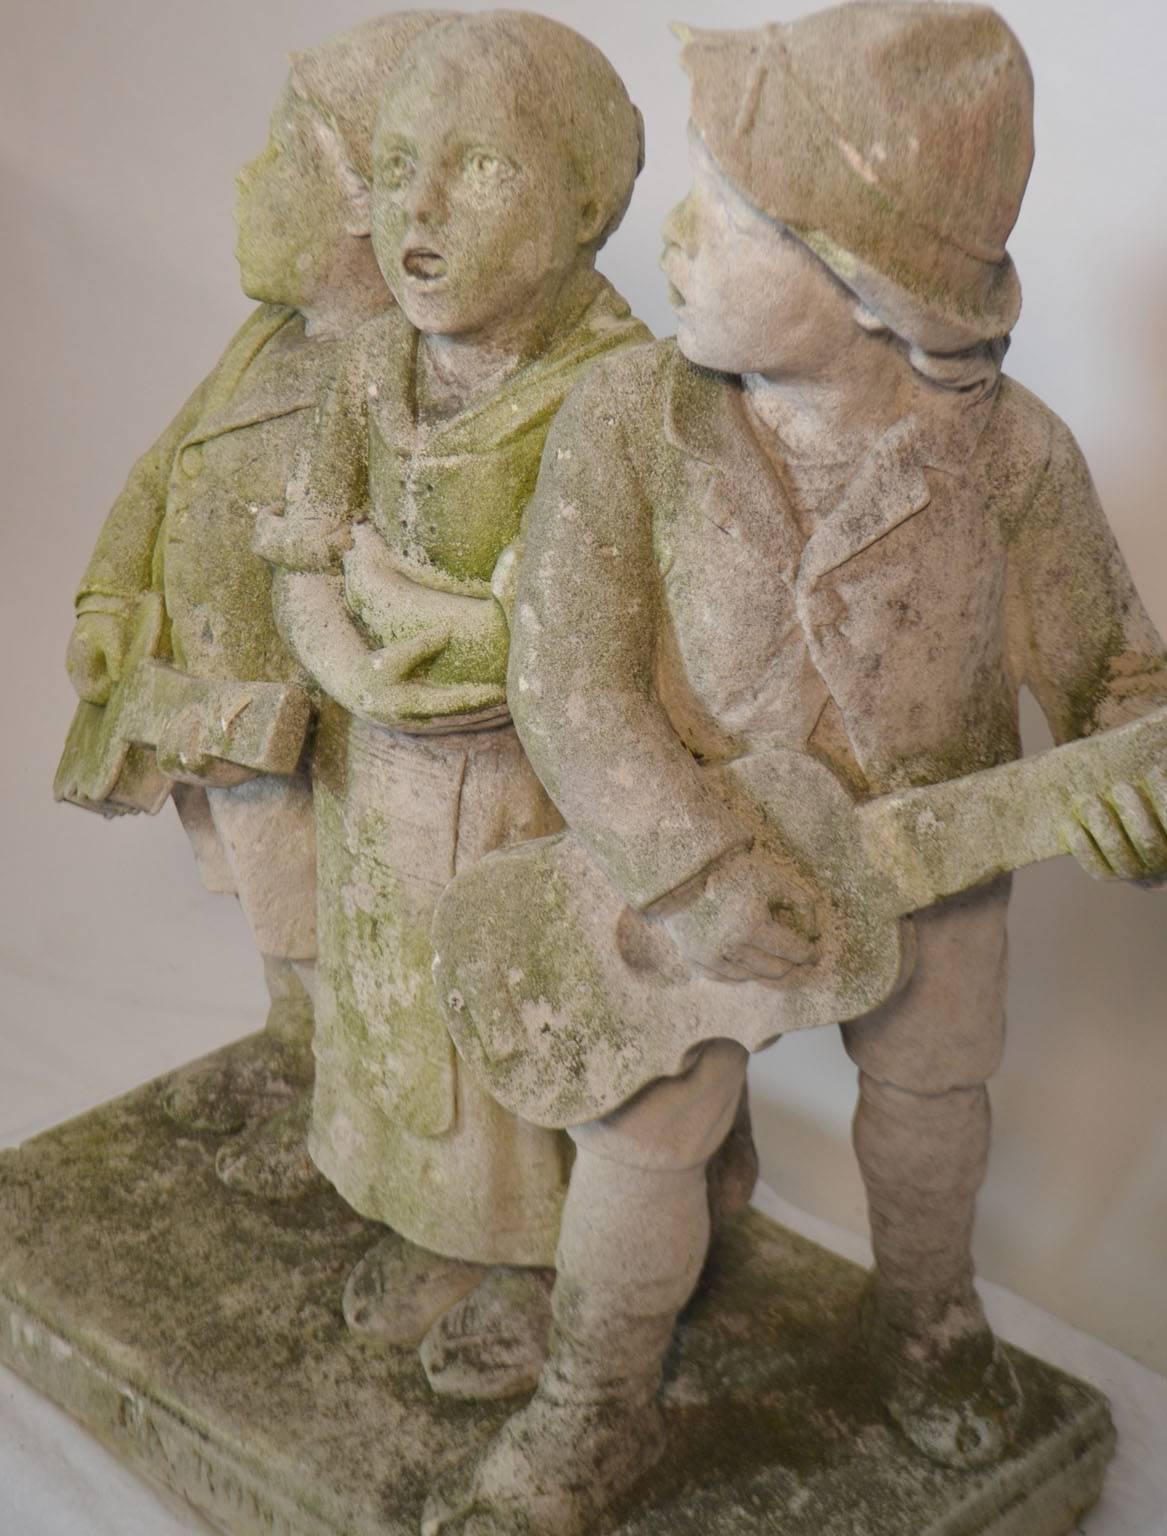 Carved stone statue of children standing and singing, circa 1900-1920.